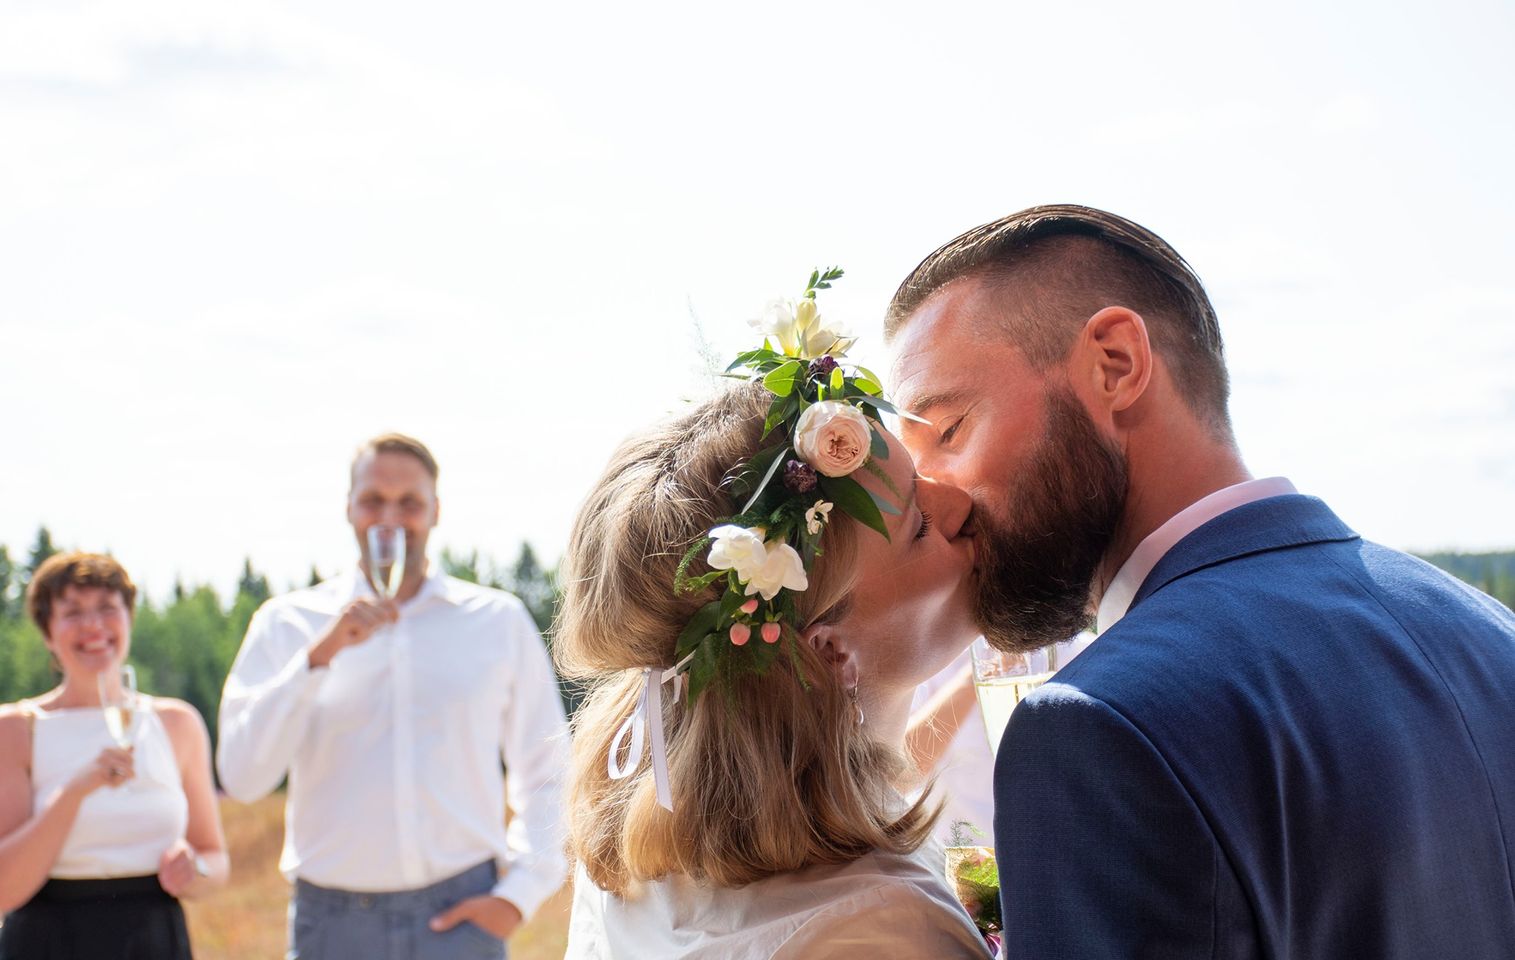 Wedding couple kissing with onlookers - by Essi Photography